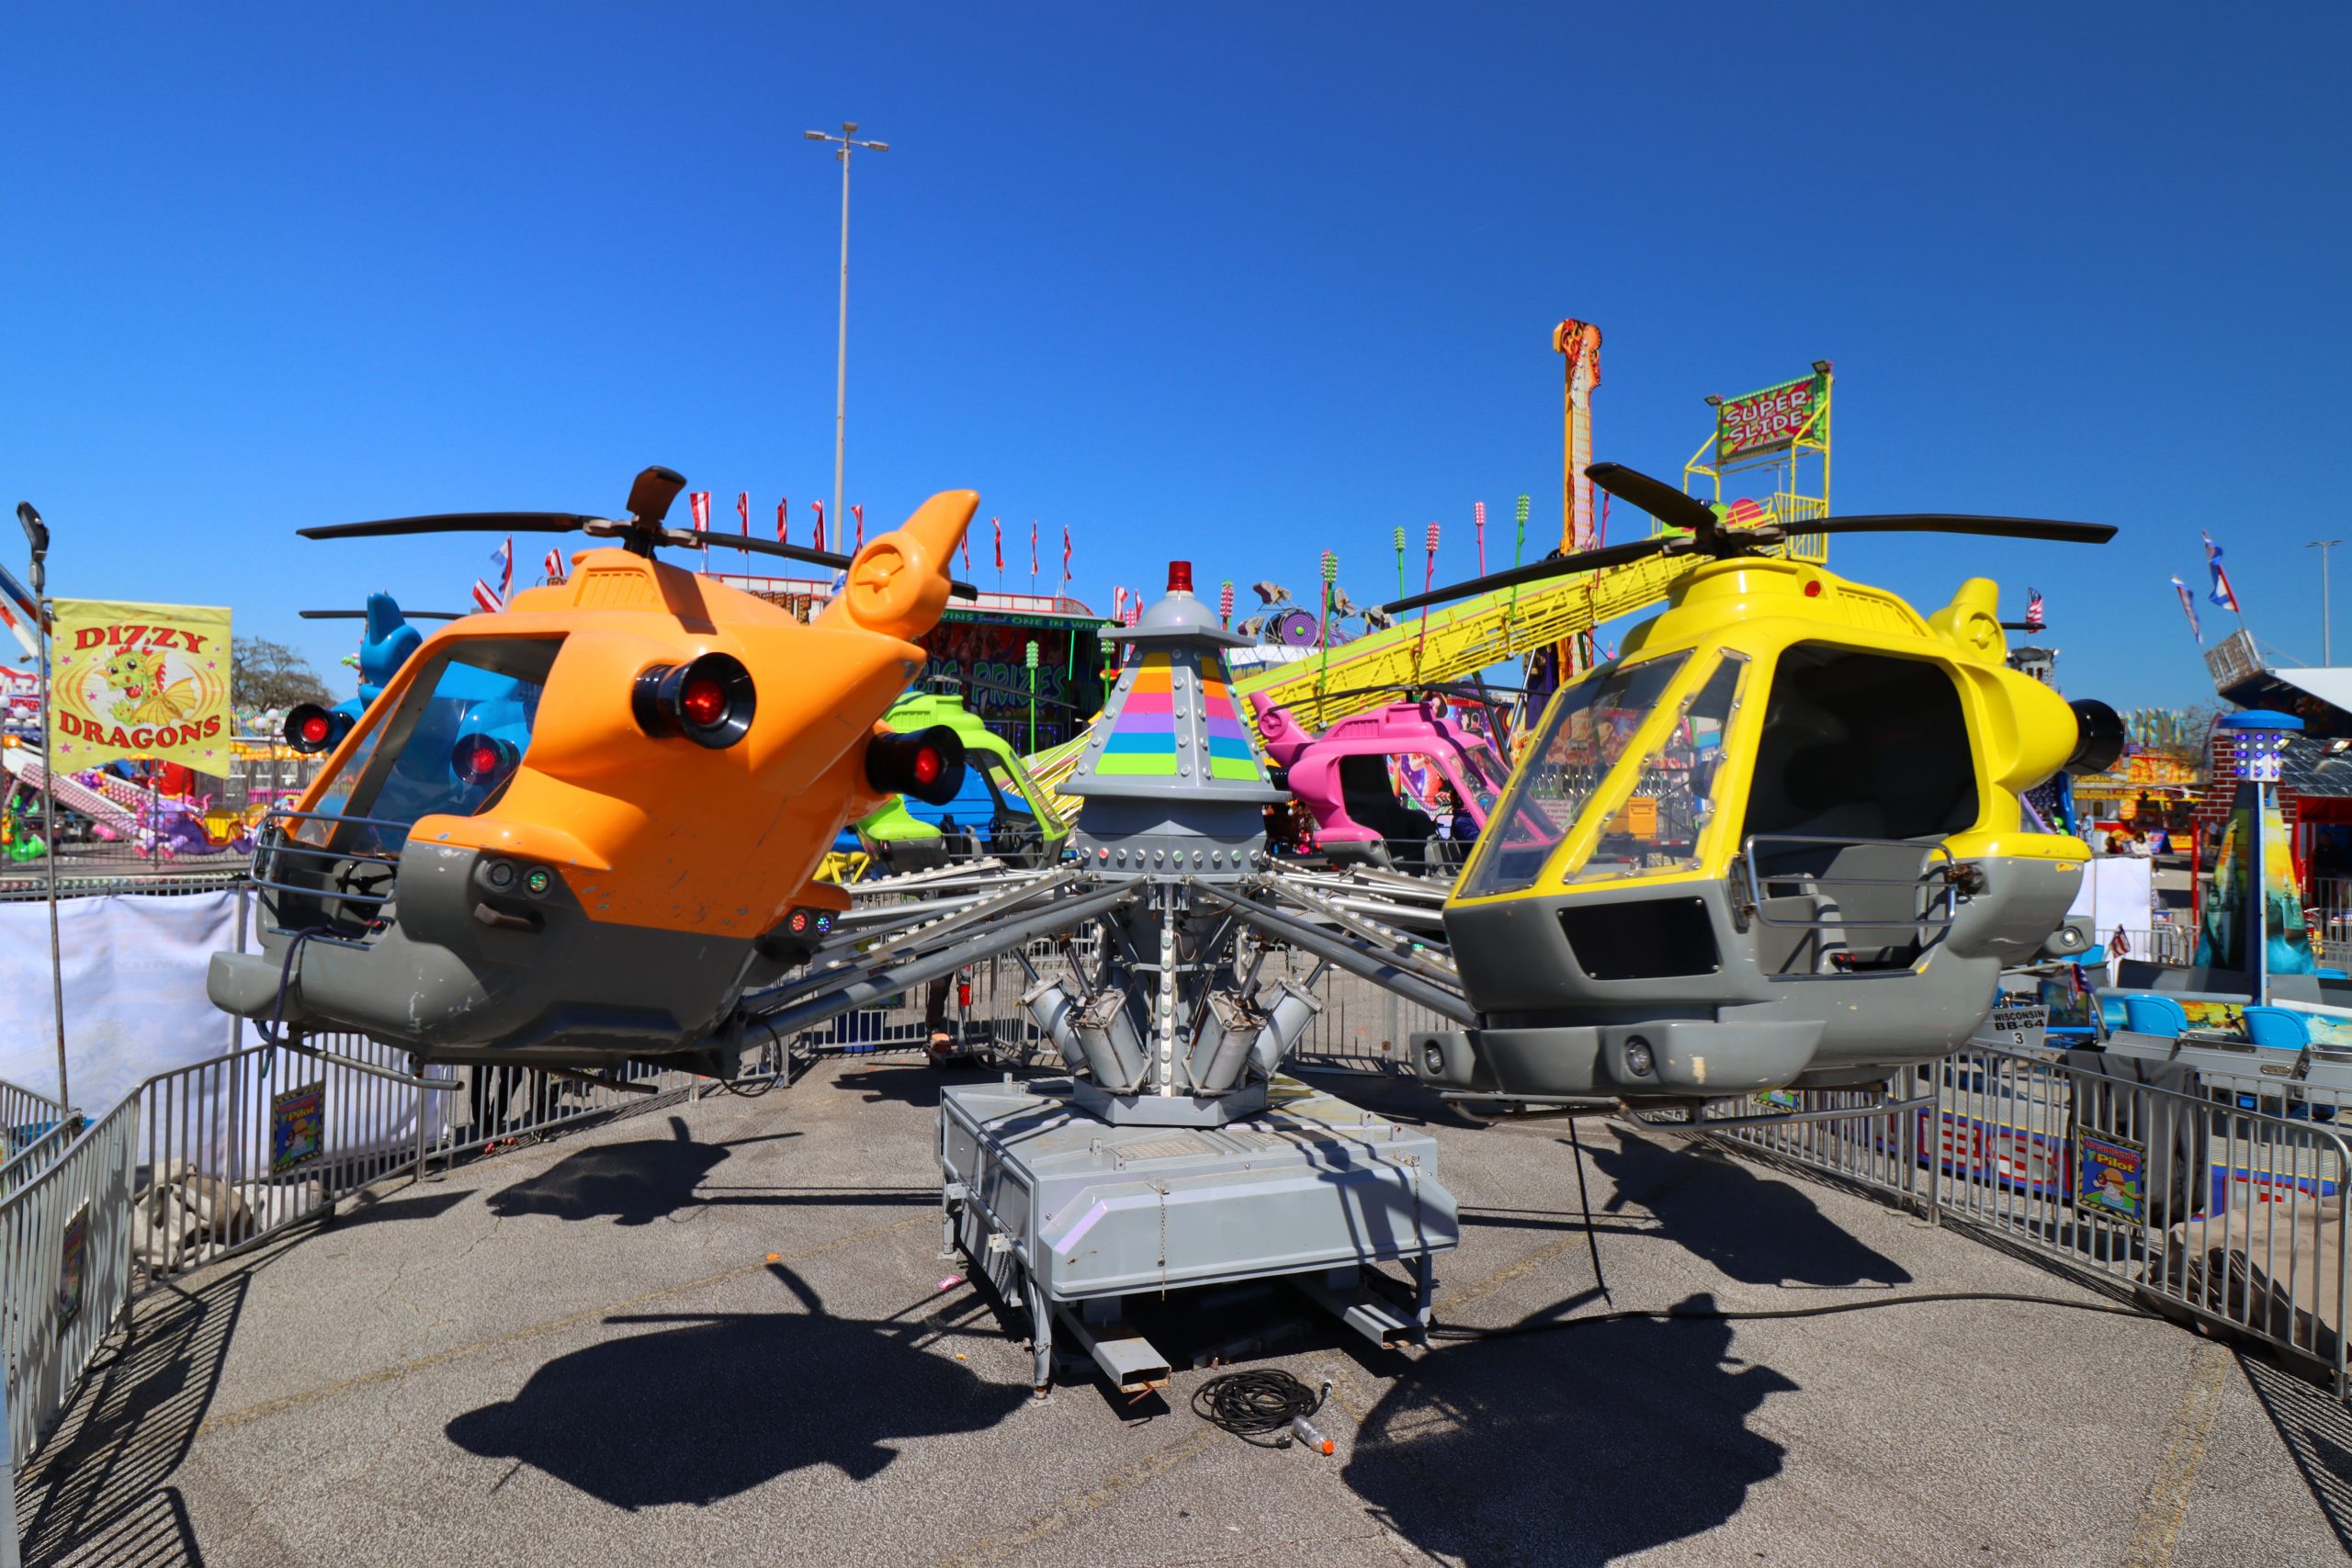 JR Pilot Helicopters